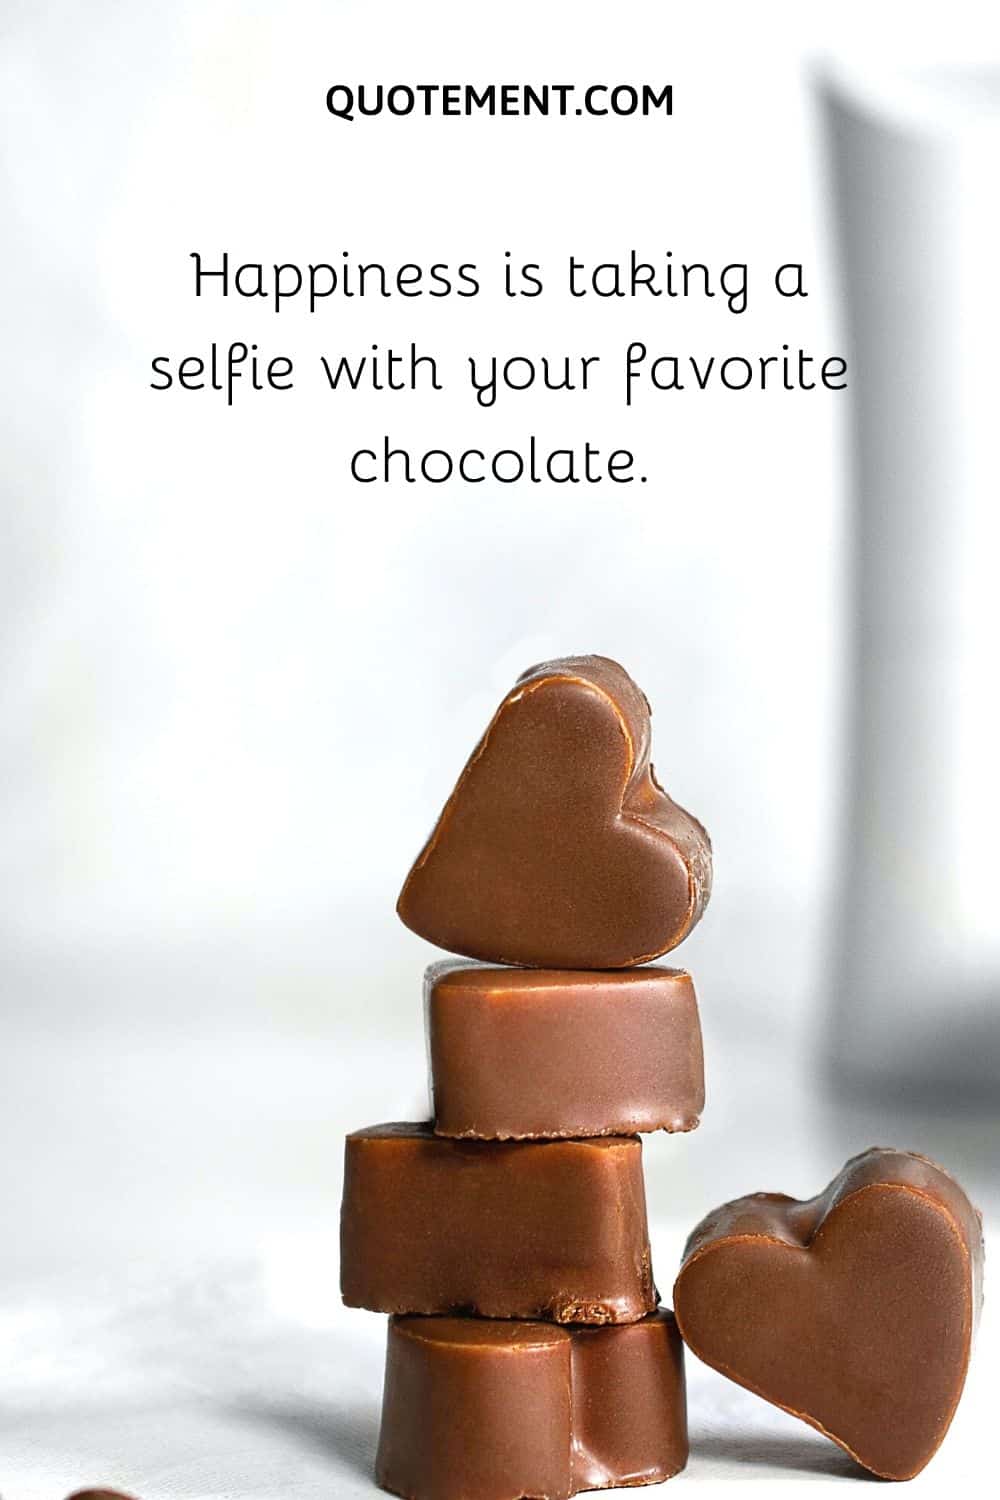 Happiness is taking a selfie with your favorite chocolate.